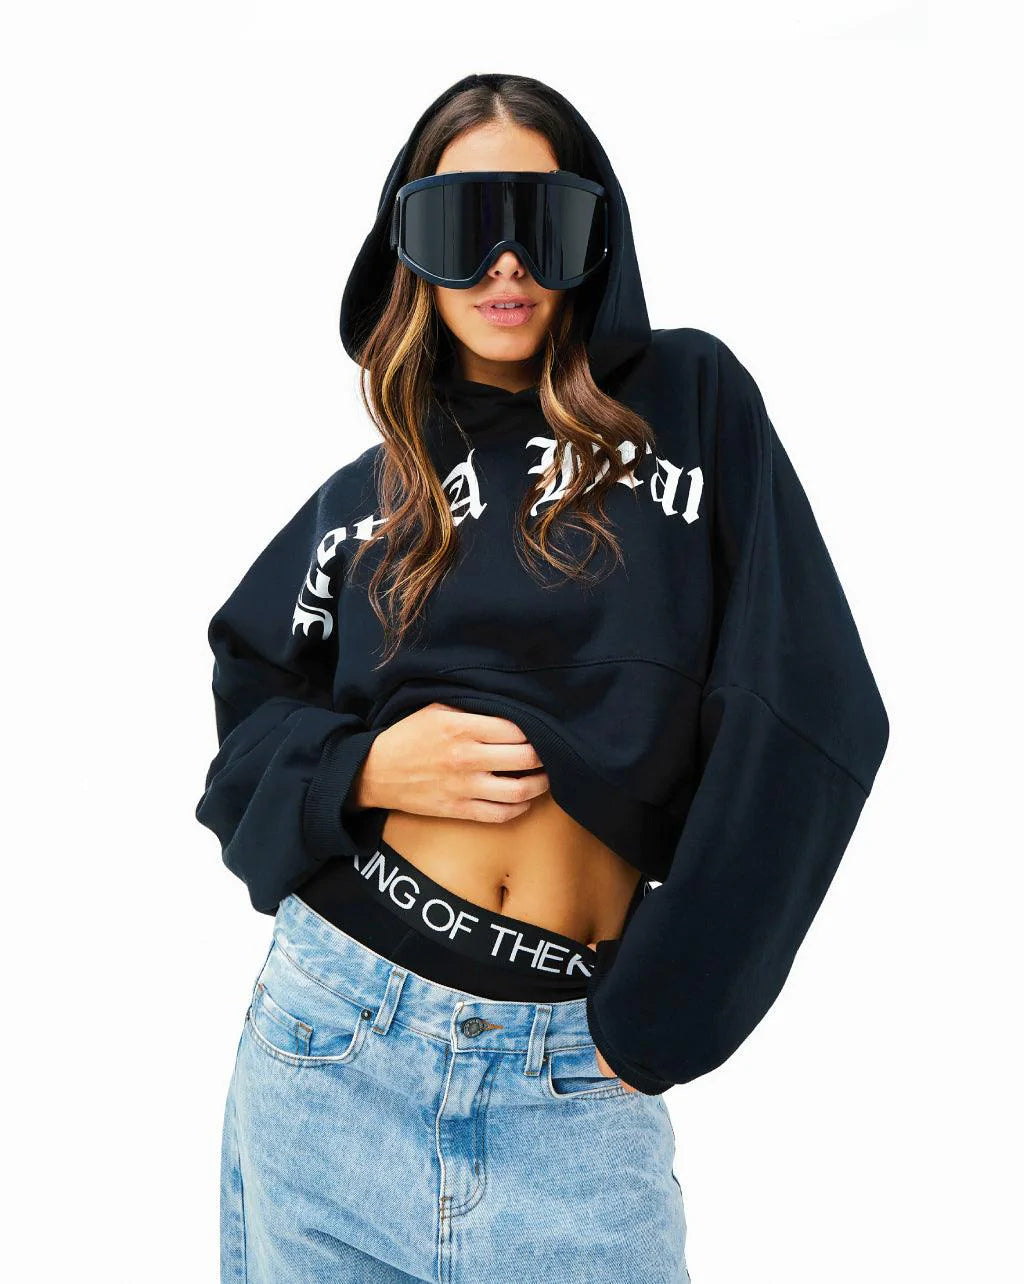 Hoodie crop top not a brand - KING OF THE KONGO